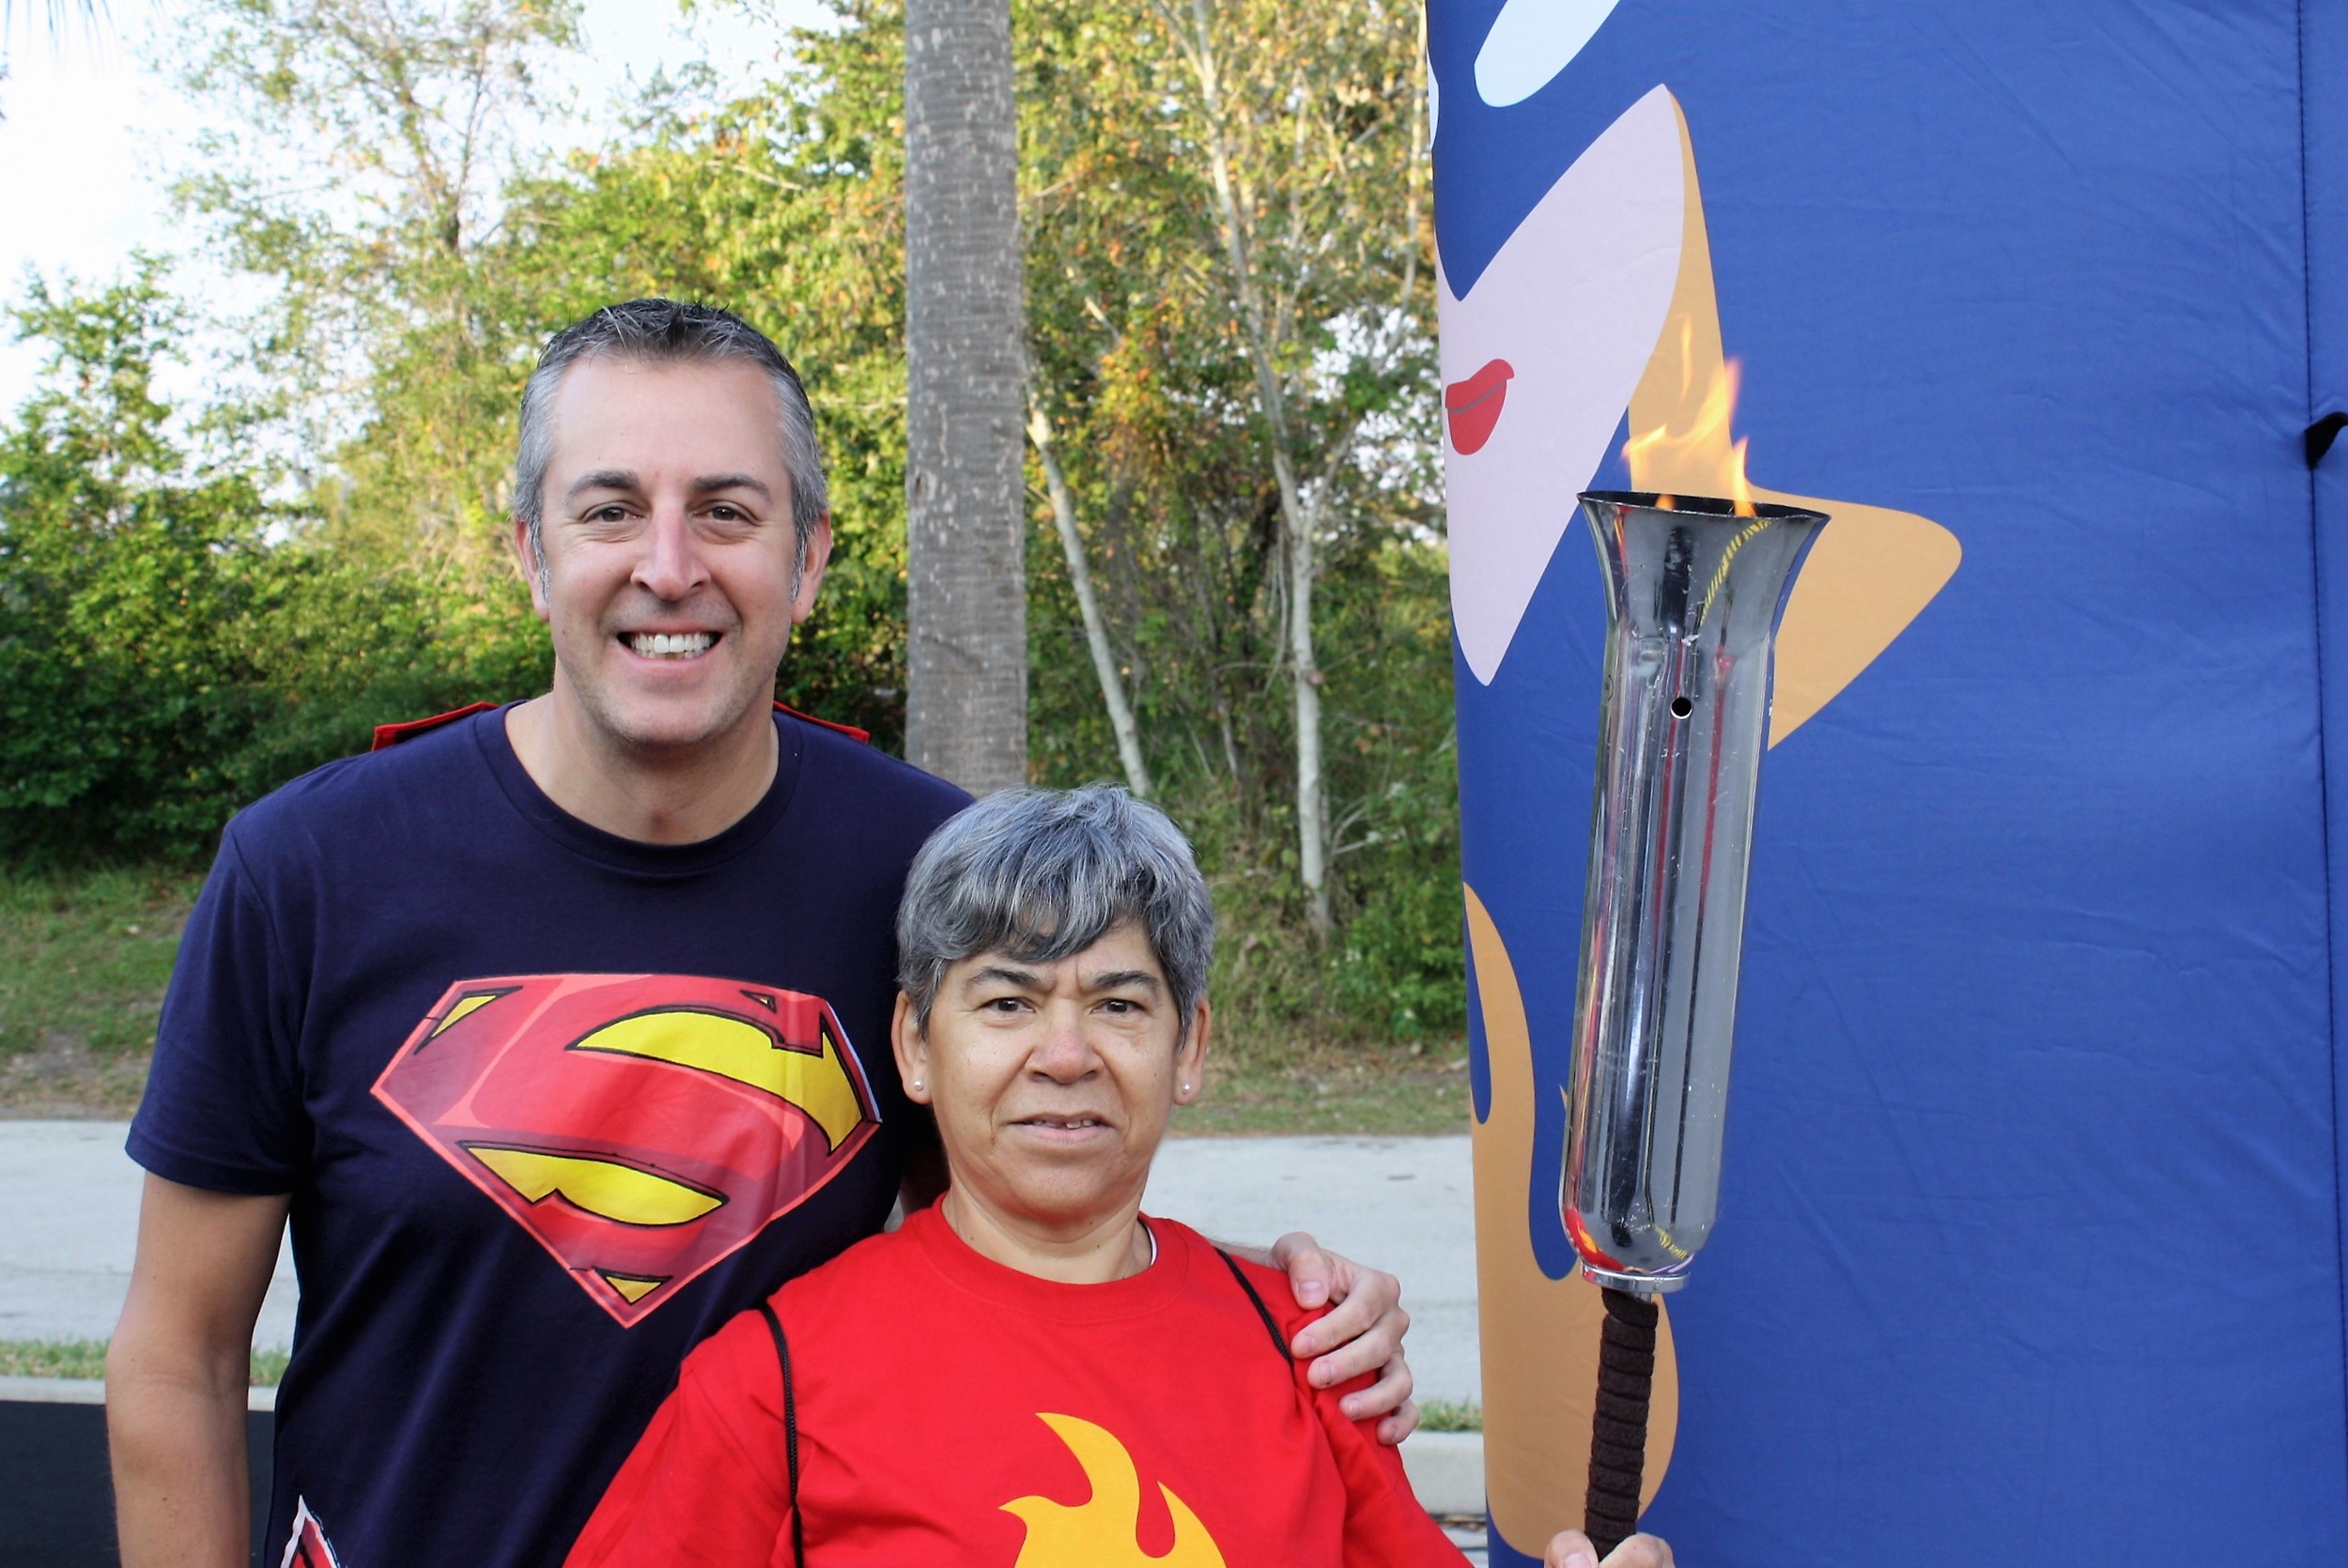 Sawgrass Marriott General Manager Todd Hickey and torch bearer Elizabeth Zuniga prepare to participate in the Torch Relay for Children’s Miracle Network Hospitals. The Sawgrass Marriott in Ponte Vedra hosted the Jacksonville stop on the national torch relay fundraising event. Participants dressed as superheroes in recognition of the relay's "Everyday Heroes" theme.